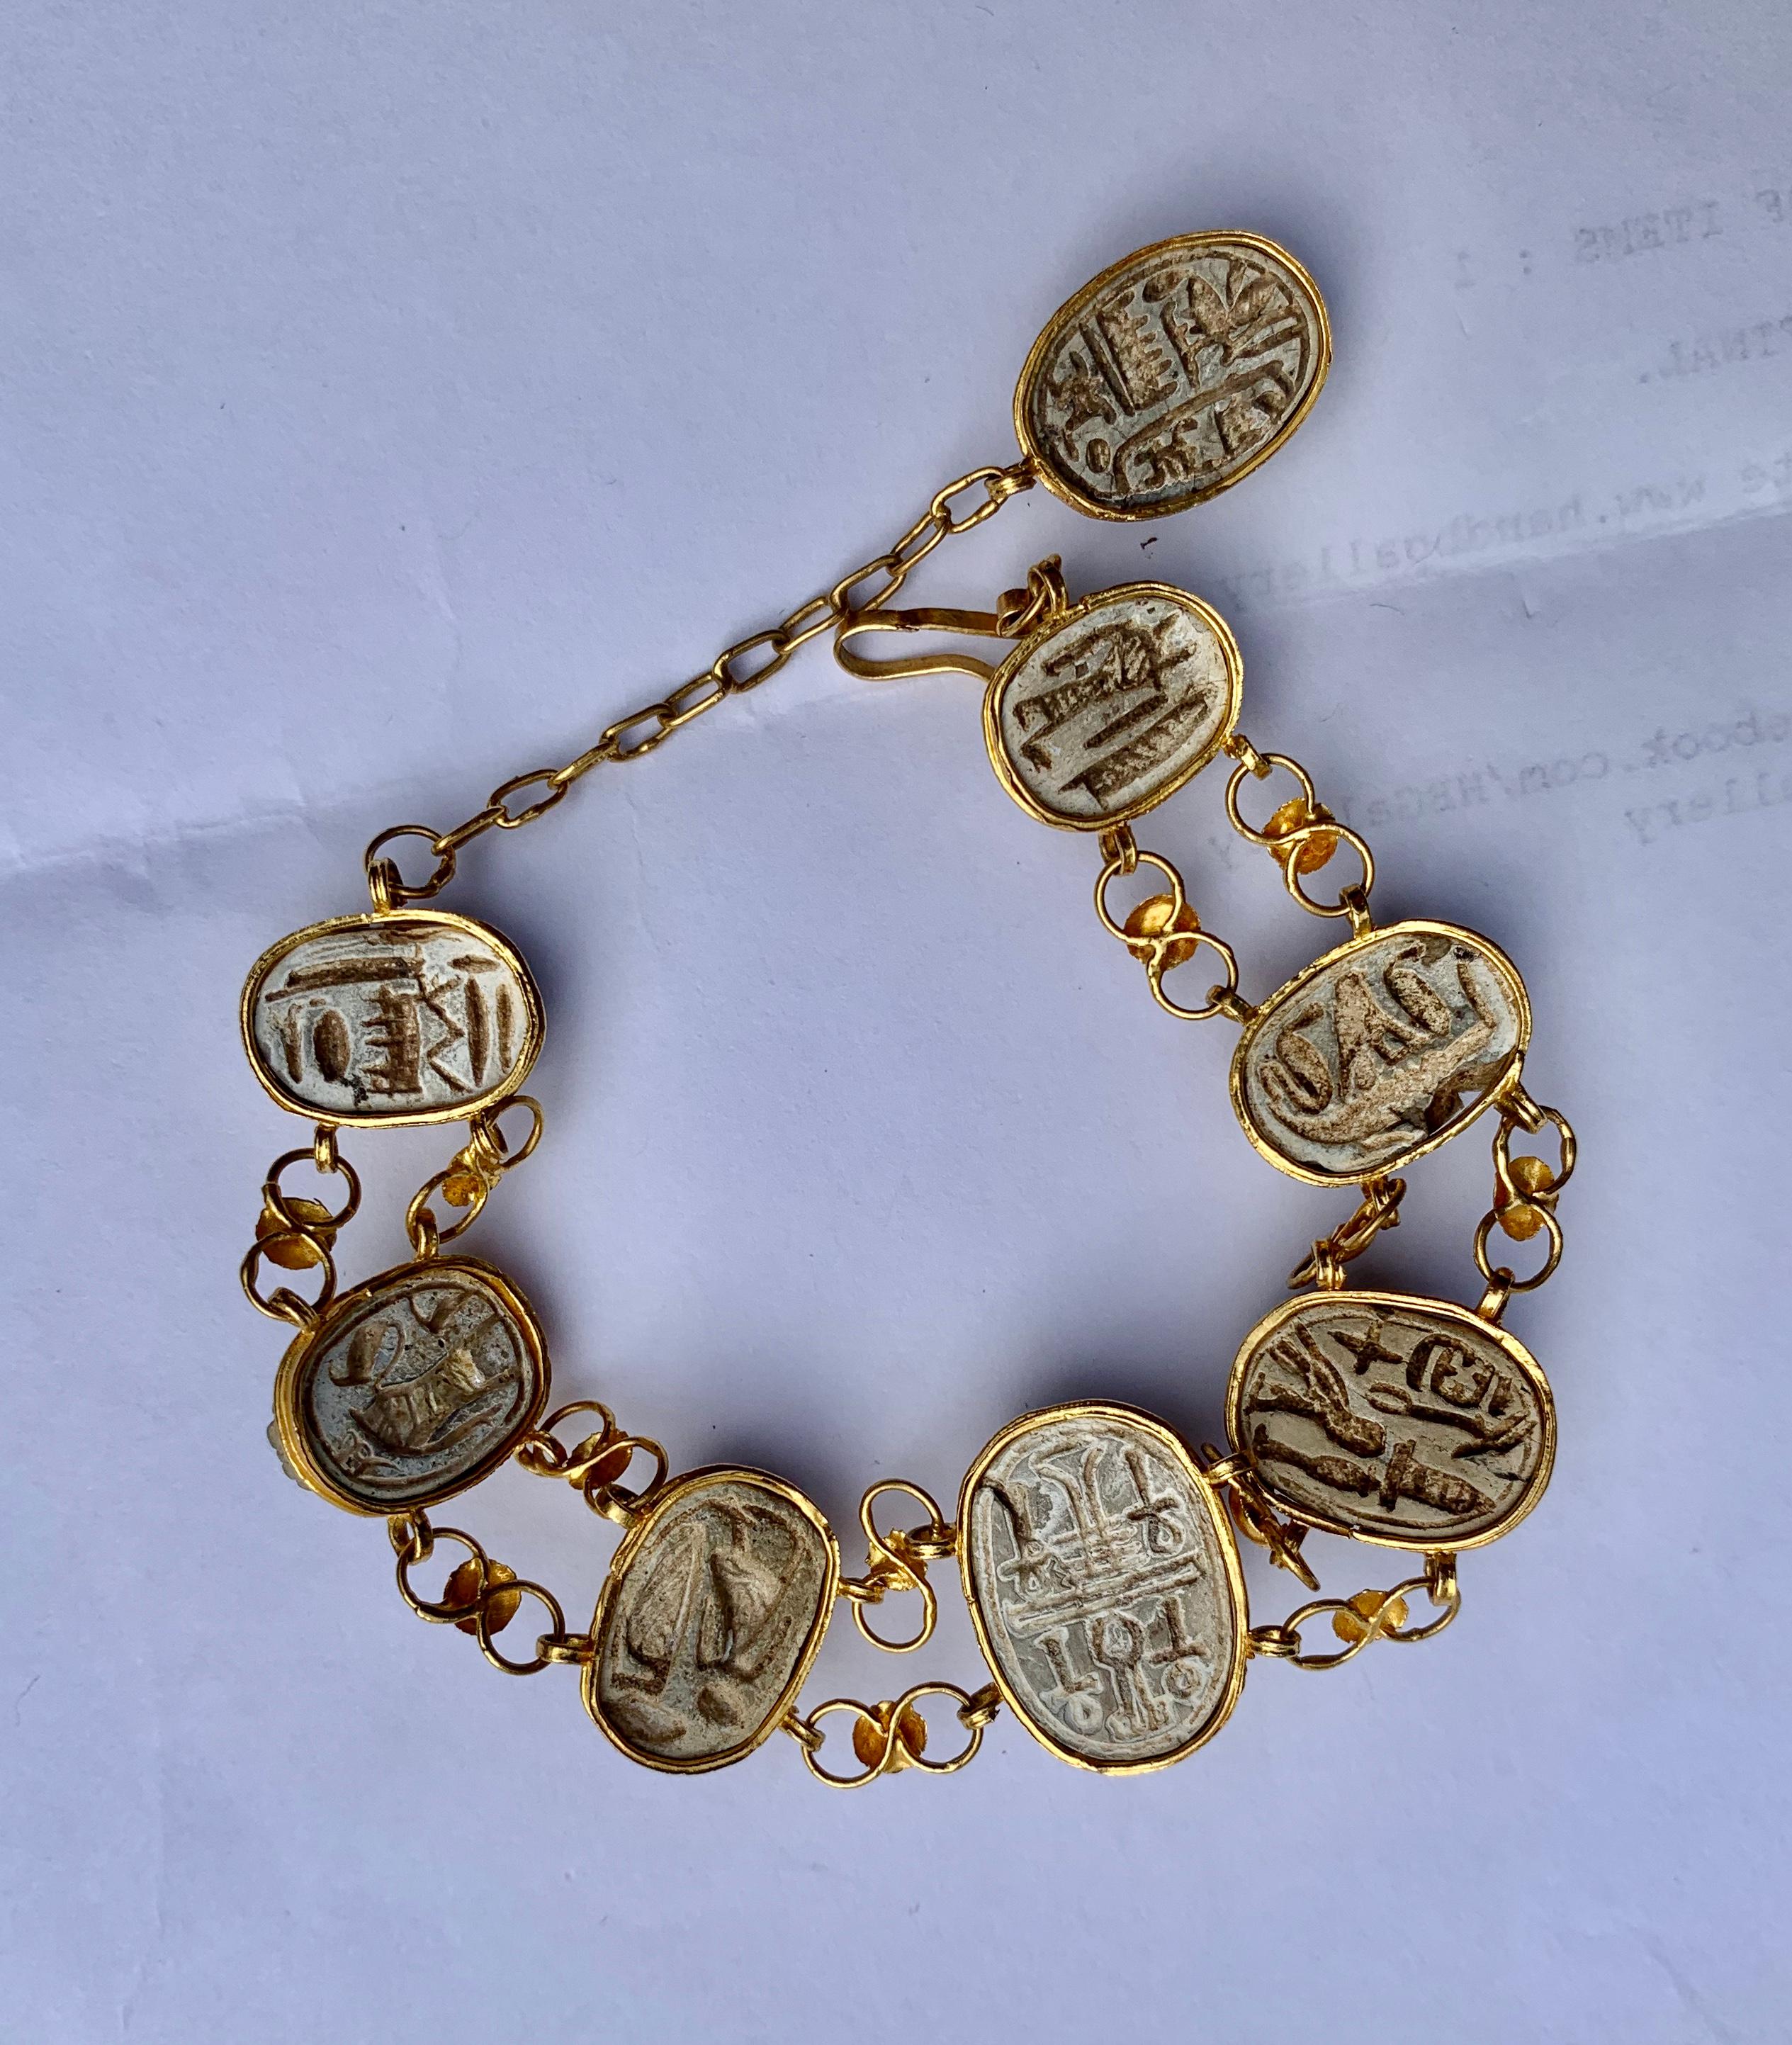 20 Karat Gold Scarab Beetle Bracelet Antique Egyptian Revival Hieroglyphics In Excellent Condition For Sale In New York, NY